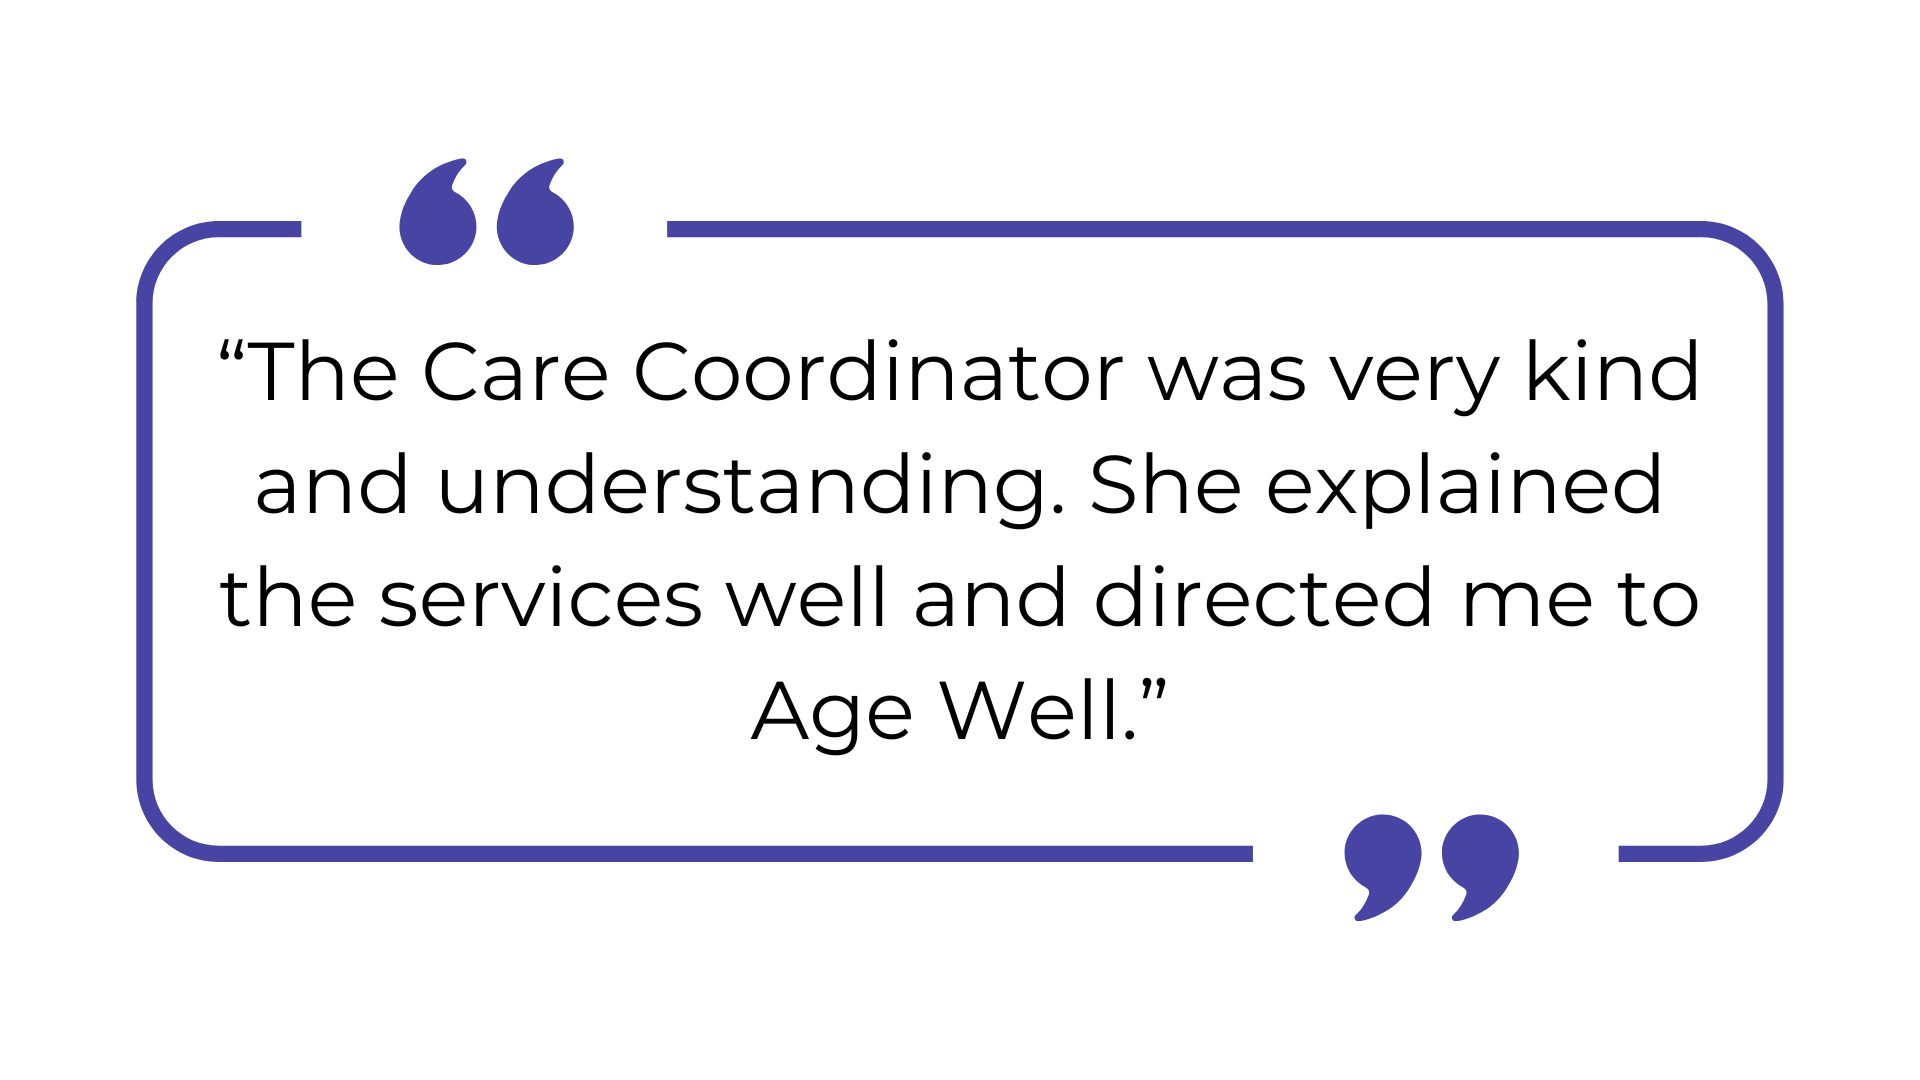 The Care Coordinator was very kind and understanding. She explained the services well and directed me to Age Well.